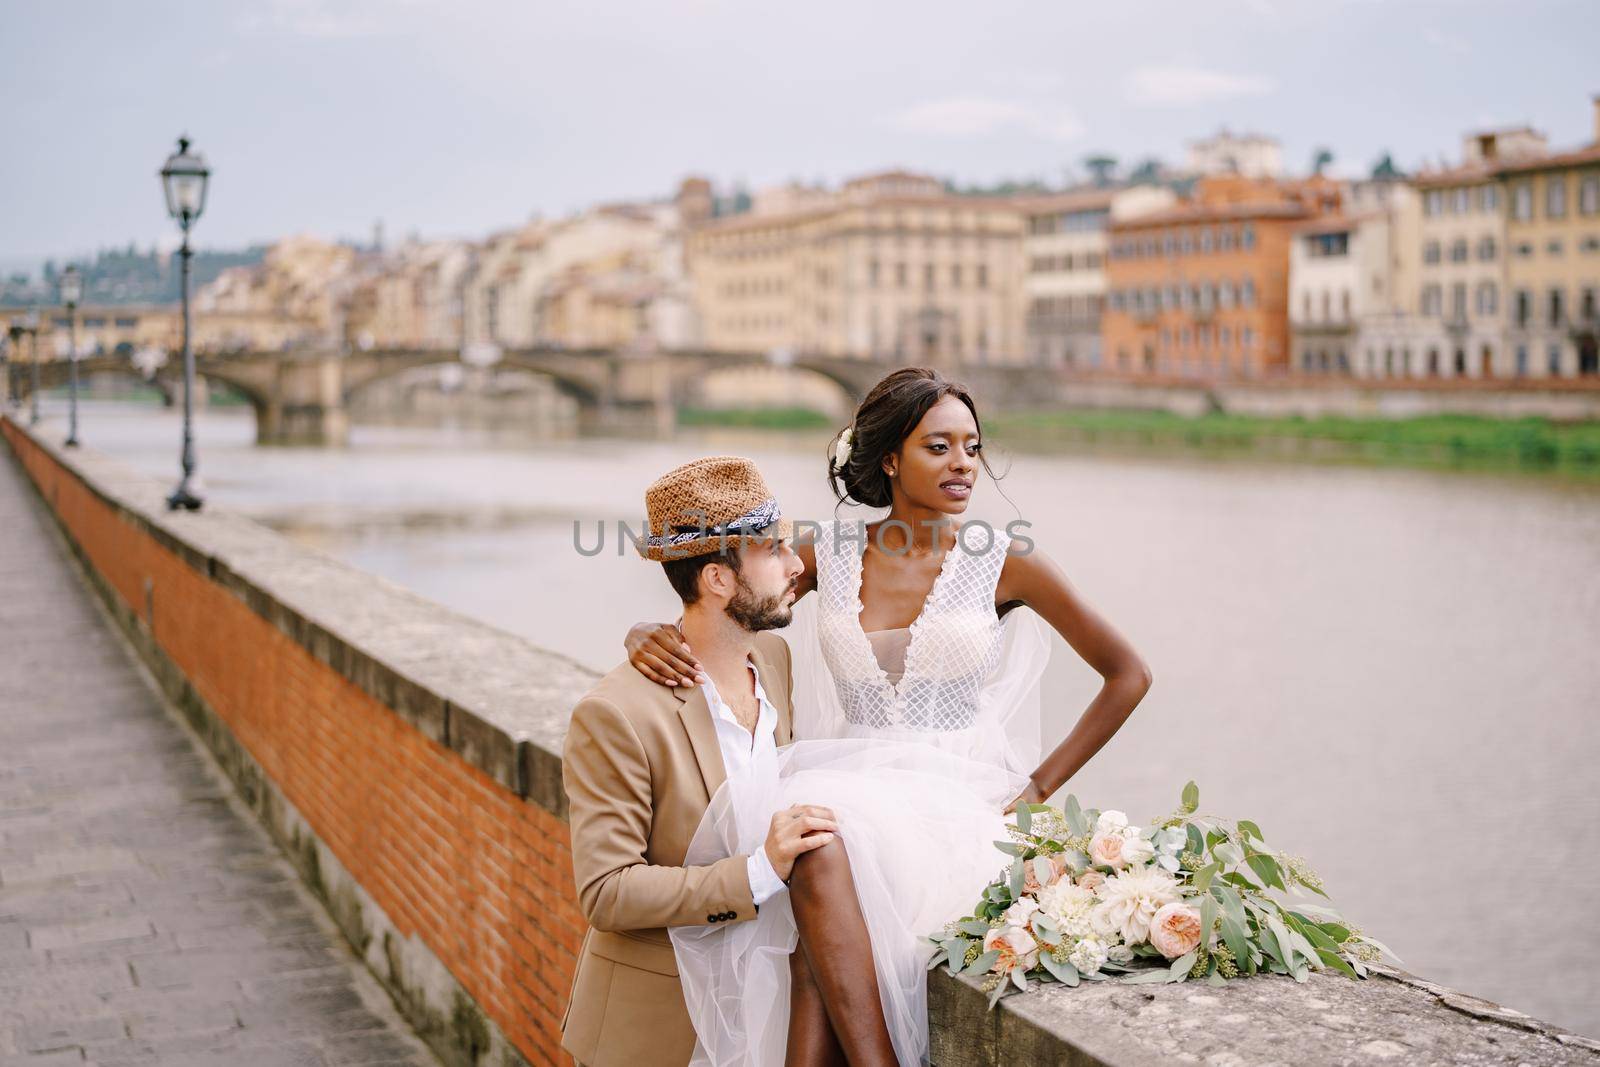 Wedding in Florence, Italy. Multiethnic wedding couple. An African-American bride is sitting on a brick wall and Caucasian groom is hugging her. Arno River Embankment, overlooking city and bridges by Nadtochiy